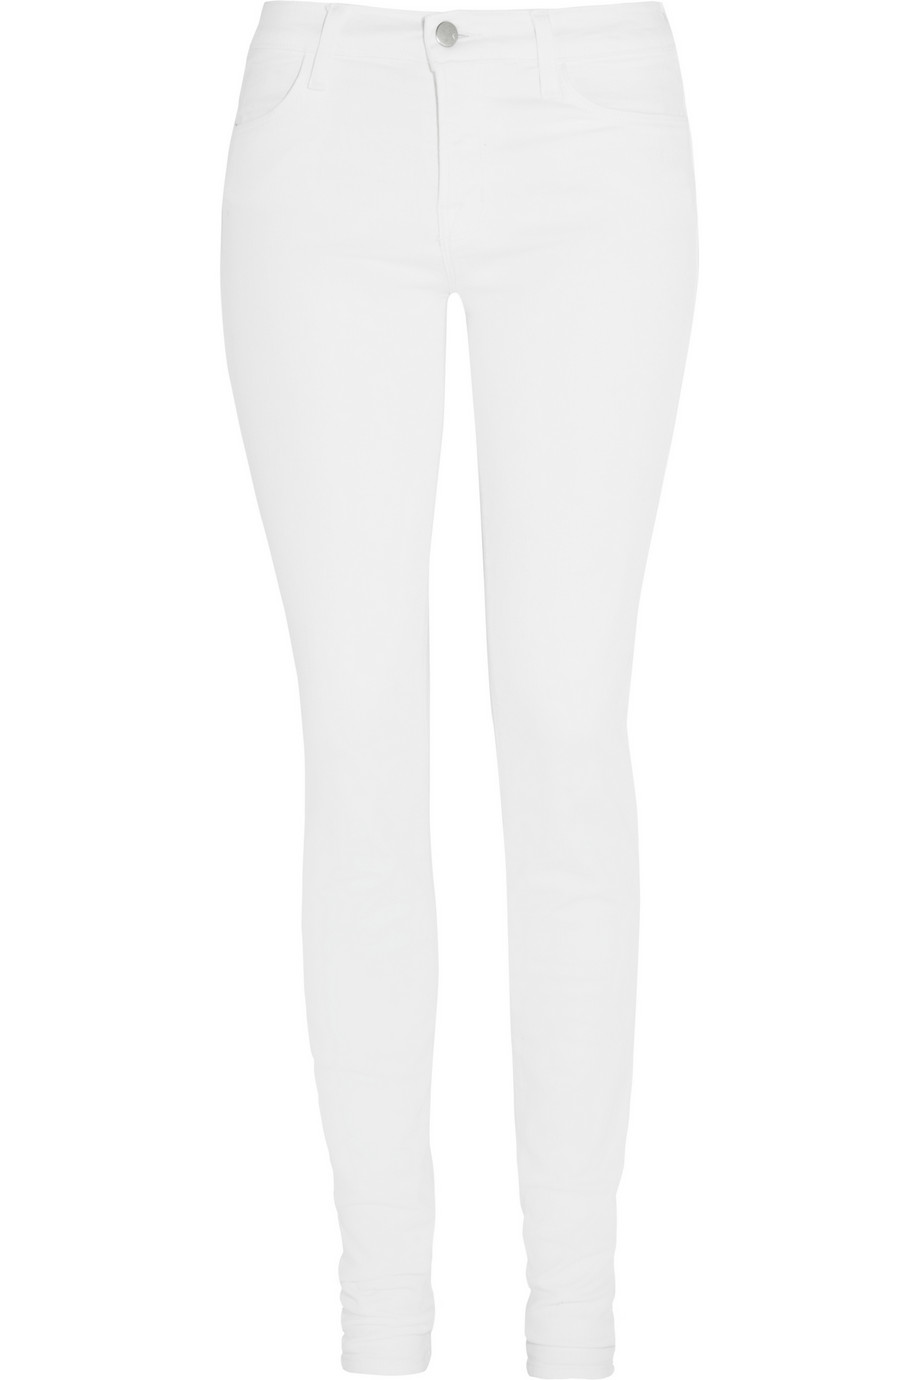 J brand Stacked Skinny Mid-Rise Jeans in White | Lyst